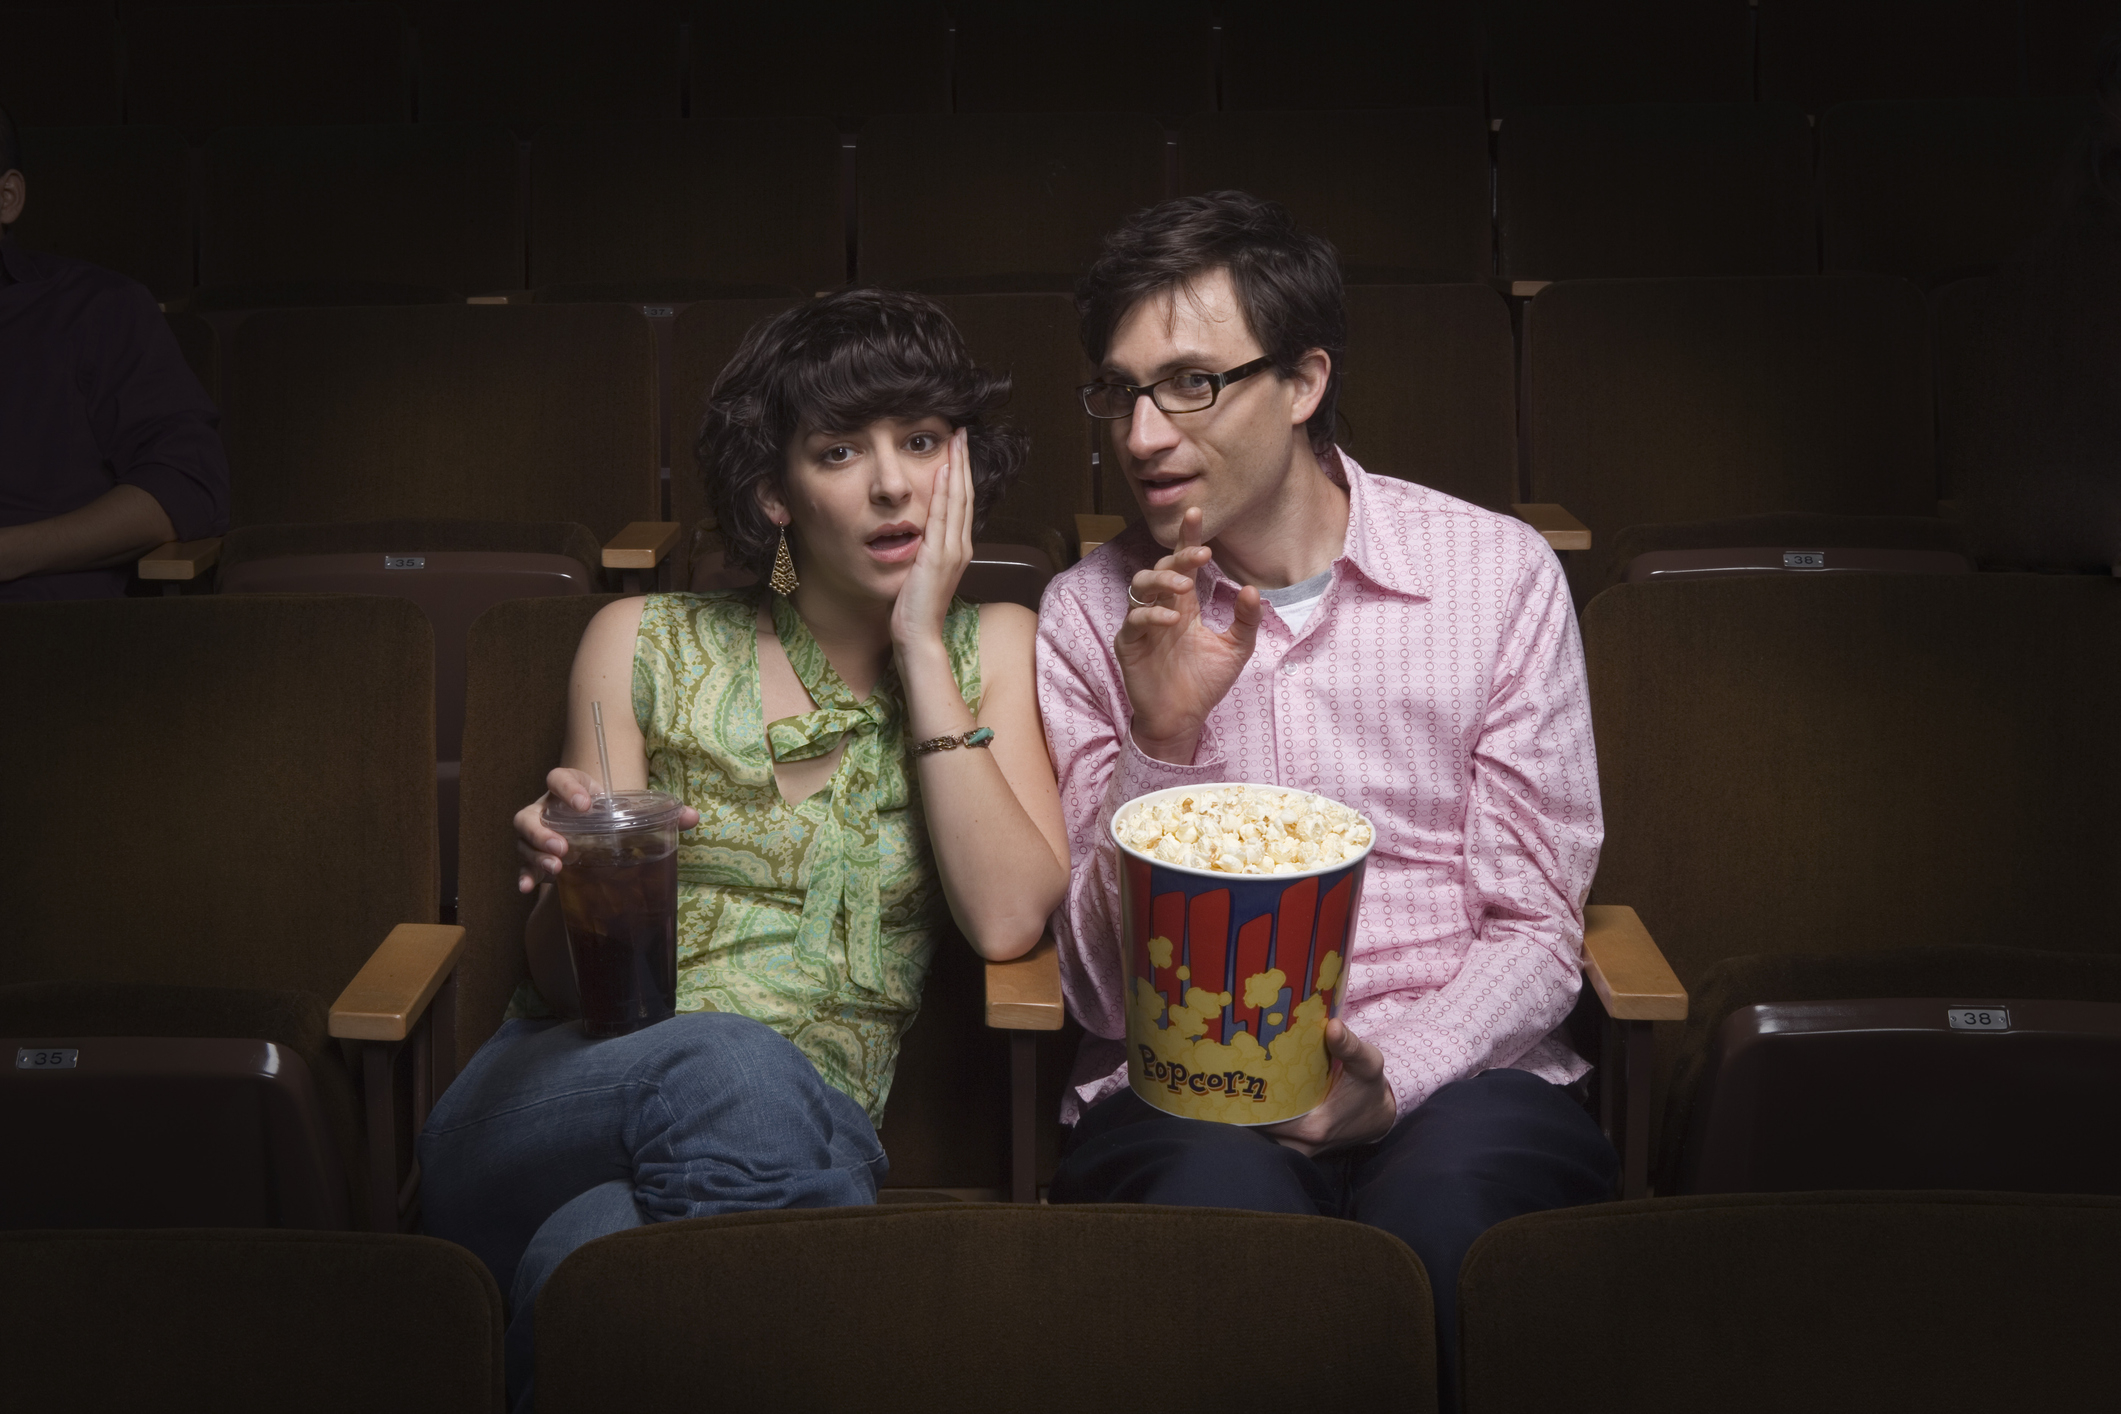 Two people sitting in a theater seem surprised with one whispering to the other; both hold snacks